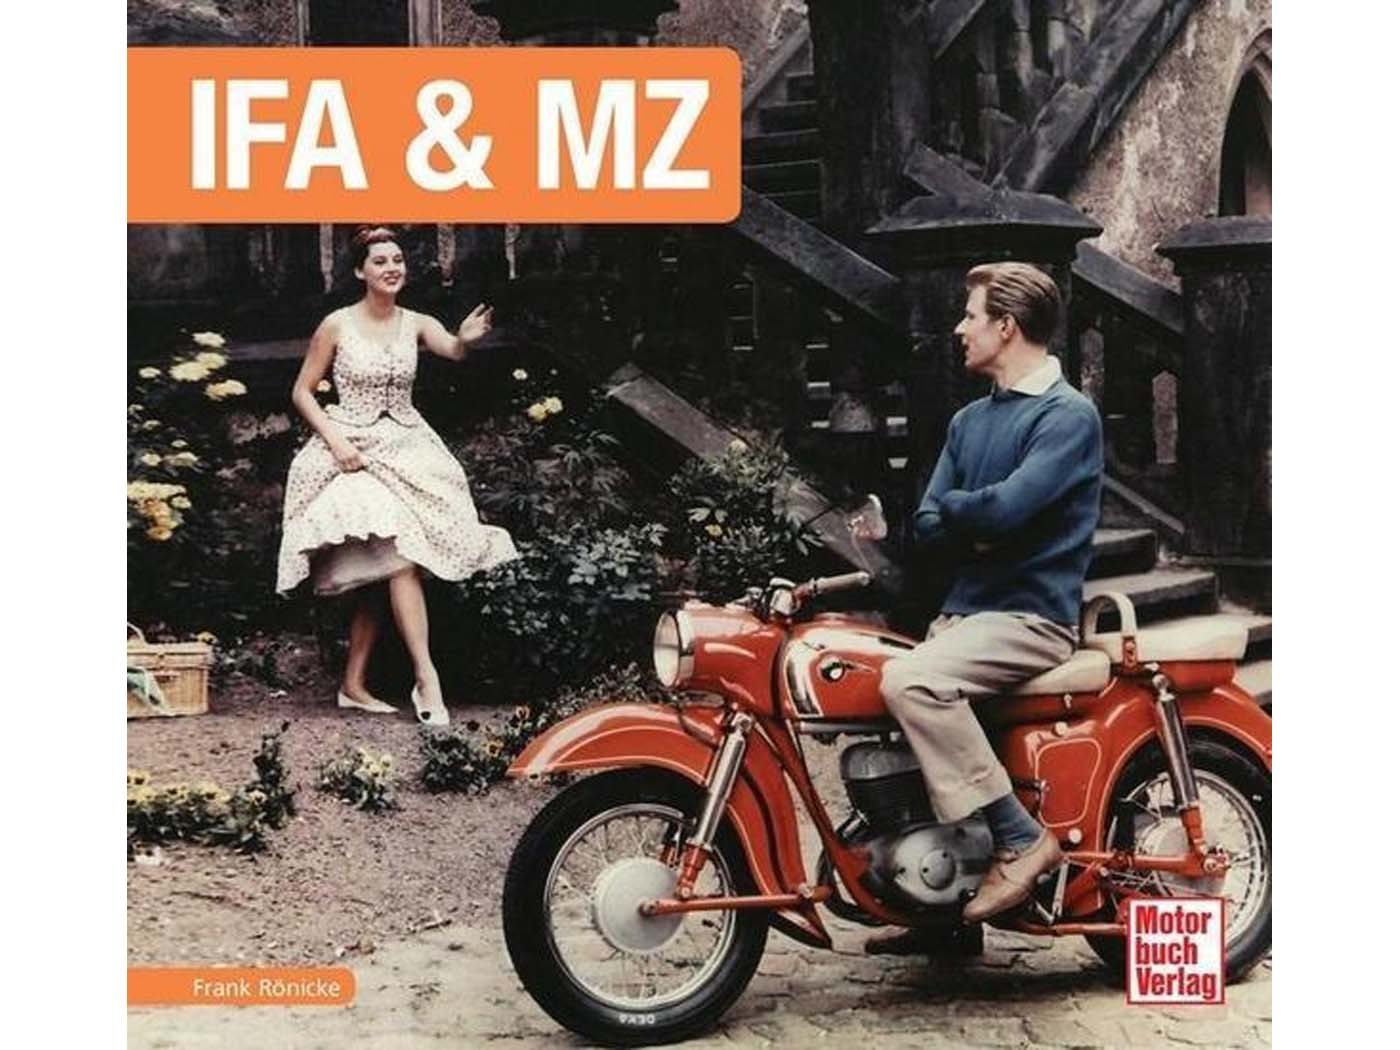 Book IFA & MZ History 1950 - 1991, 95 Pages 23cm High 24,5cm Wide For Moped Mokick